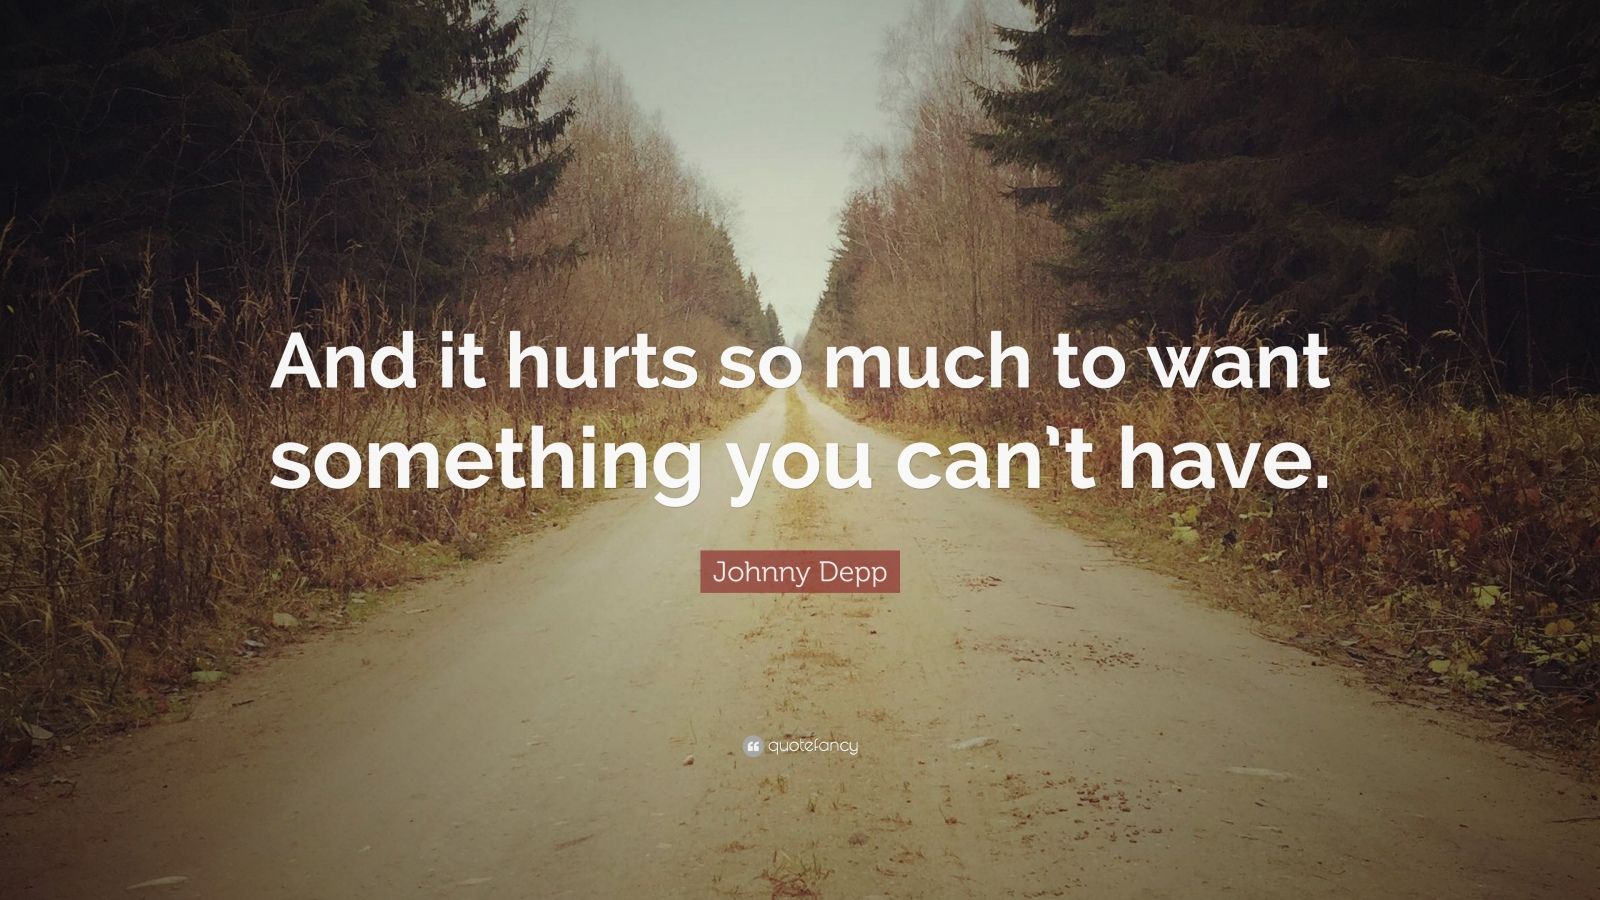 Johnny Depp Quote: “And it hurts so much to want something you can’t ...